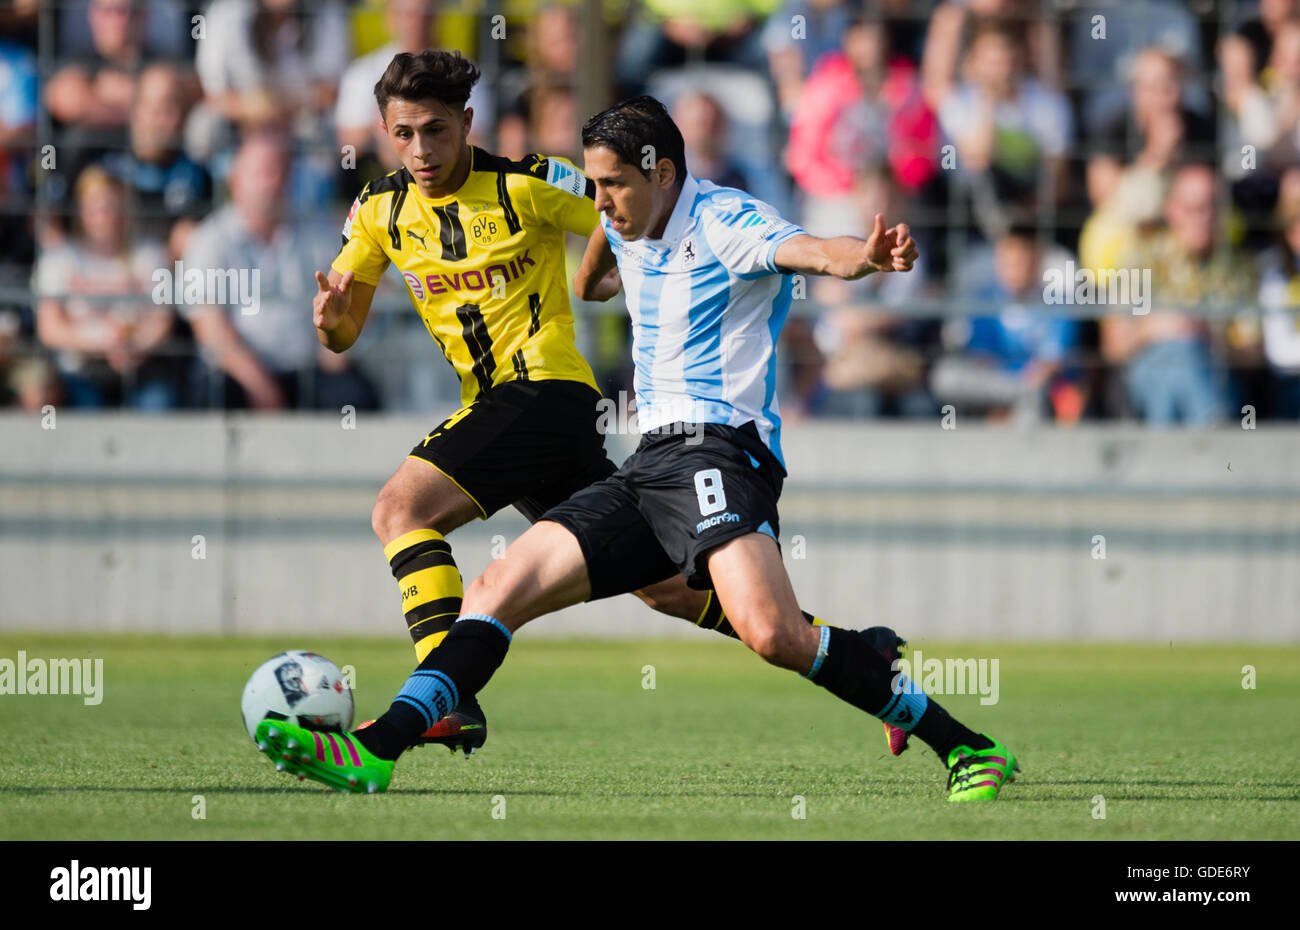 Munich, Germany. 16th July, 2016. Karim Matmour (r) of the second division team TSV 1960 Munich and Dario Scuderi (l) of premiere league team Borussia Dortmund fight for the ball in a test match between TSV 1860 Munich and Borussia Dortmund in the stadium at Grunswalder Strasse in Munich, Germany, 16 July 2016. Photo: Matthias Balk/dpa/Alamy Live News Stock Photo